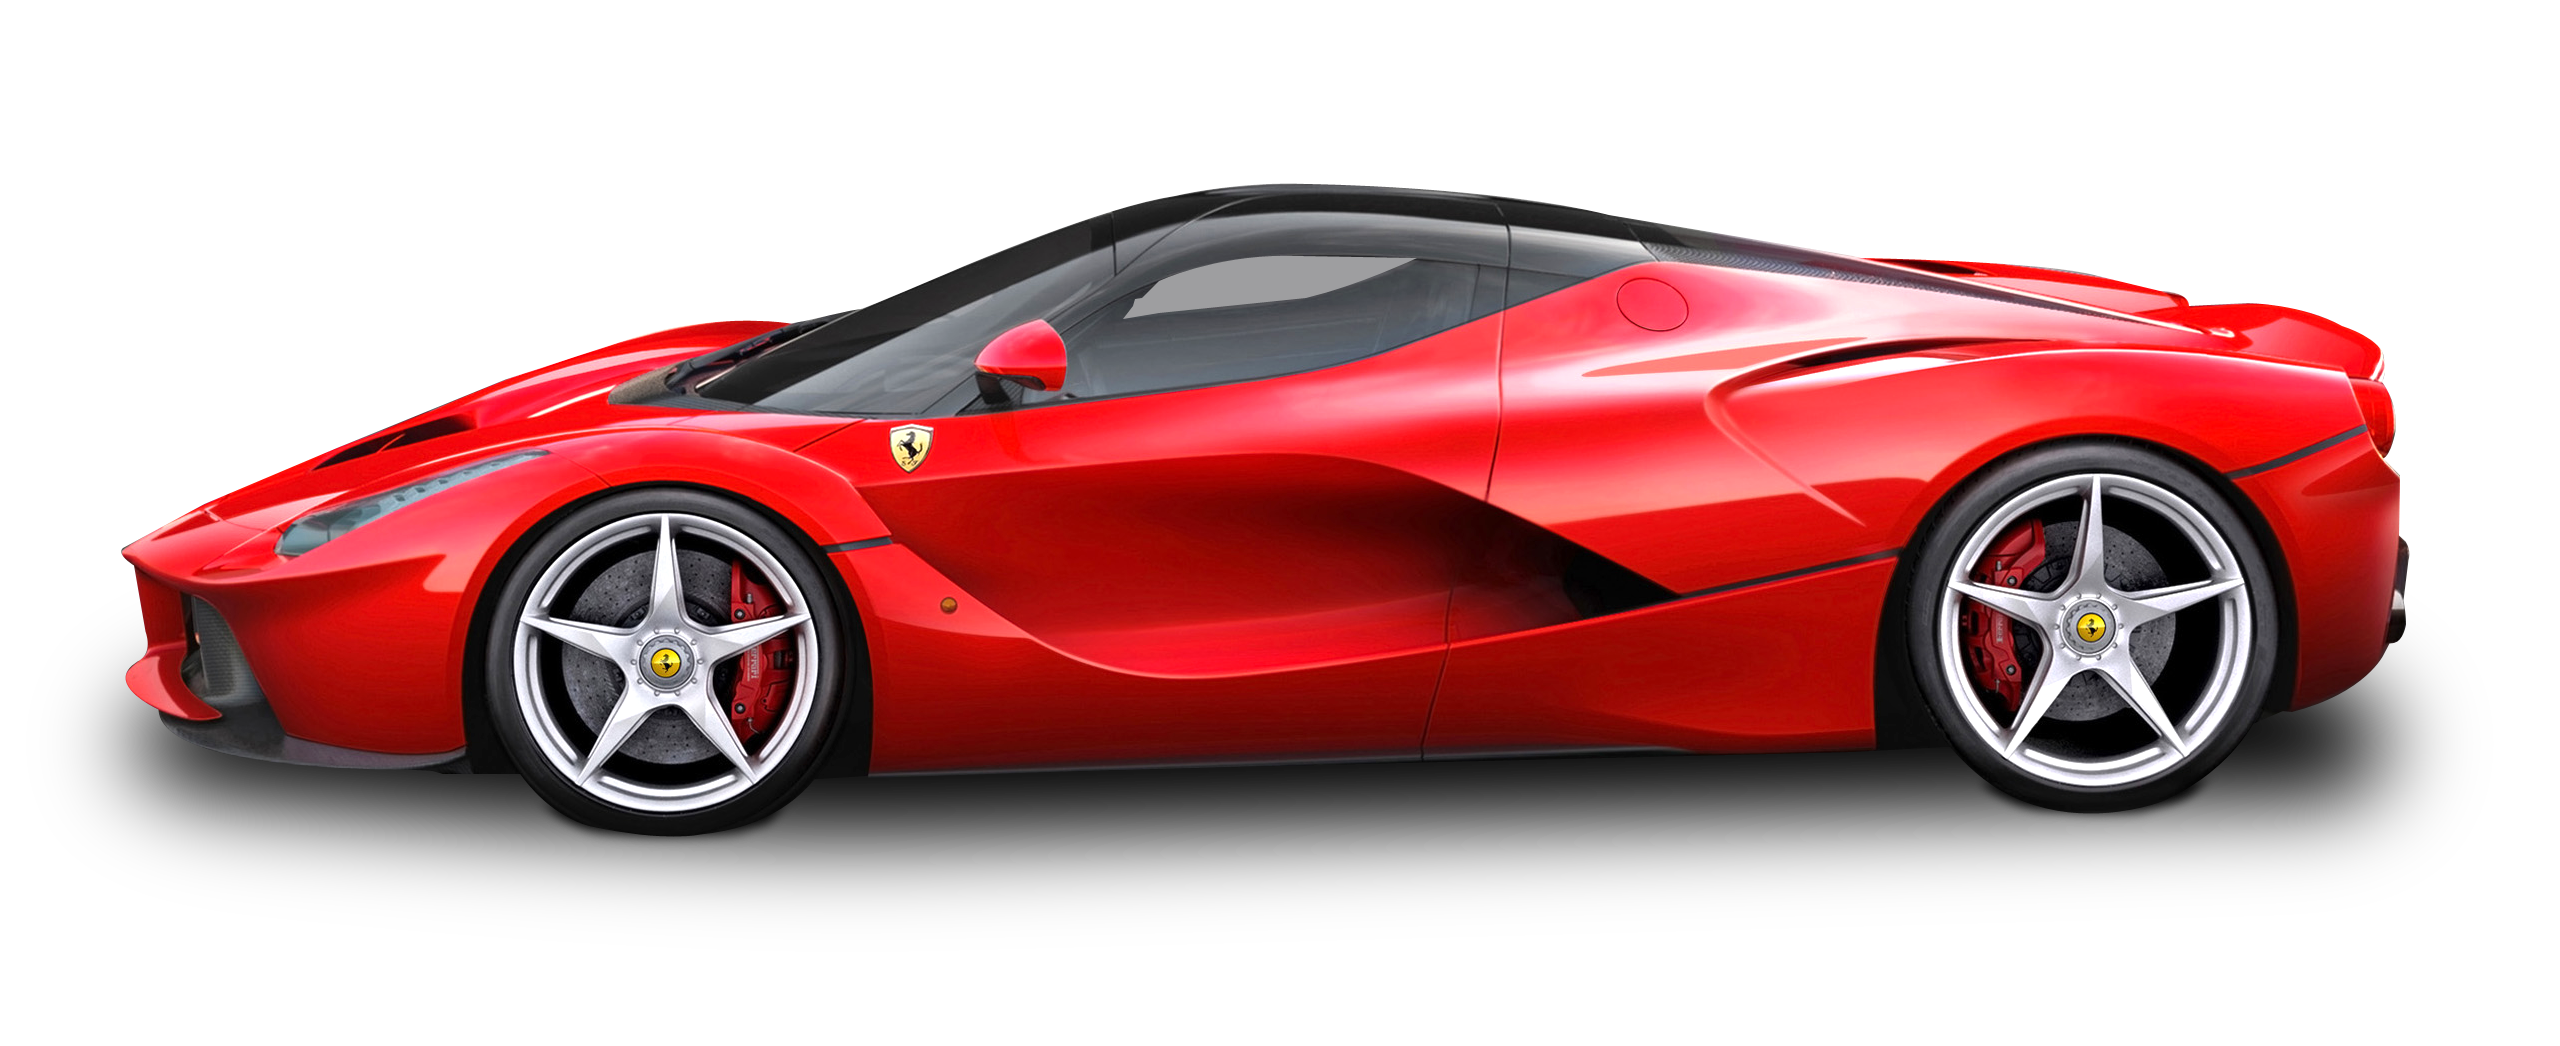 Red sports car, ferrari png #39069 - Free Icons and PNG Backgrounds